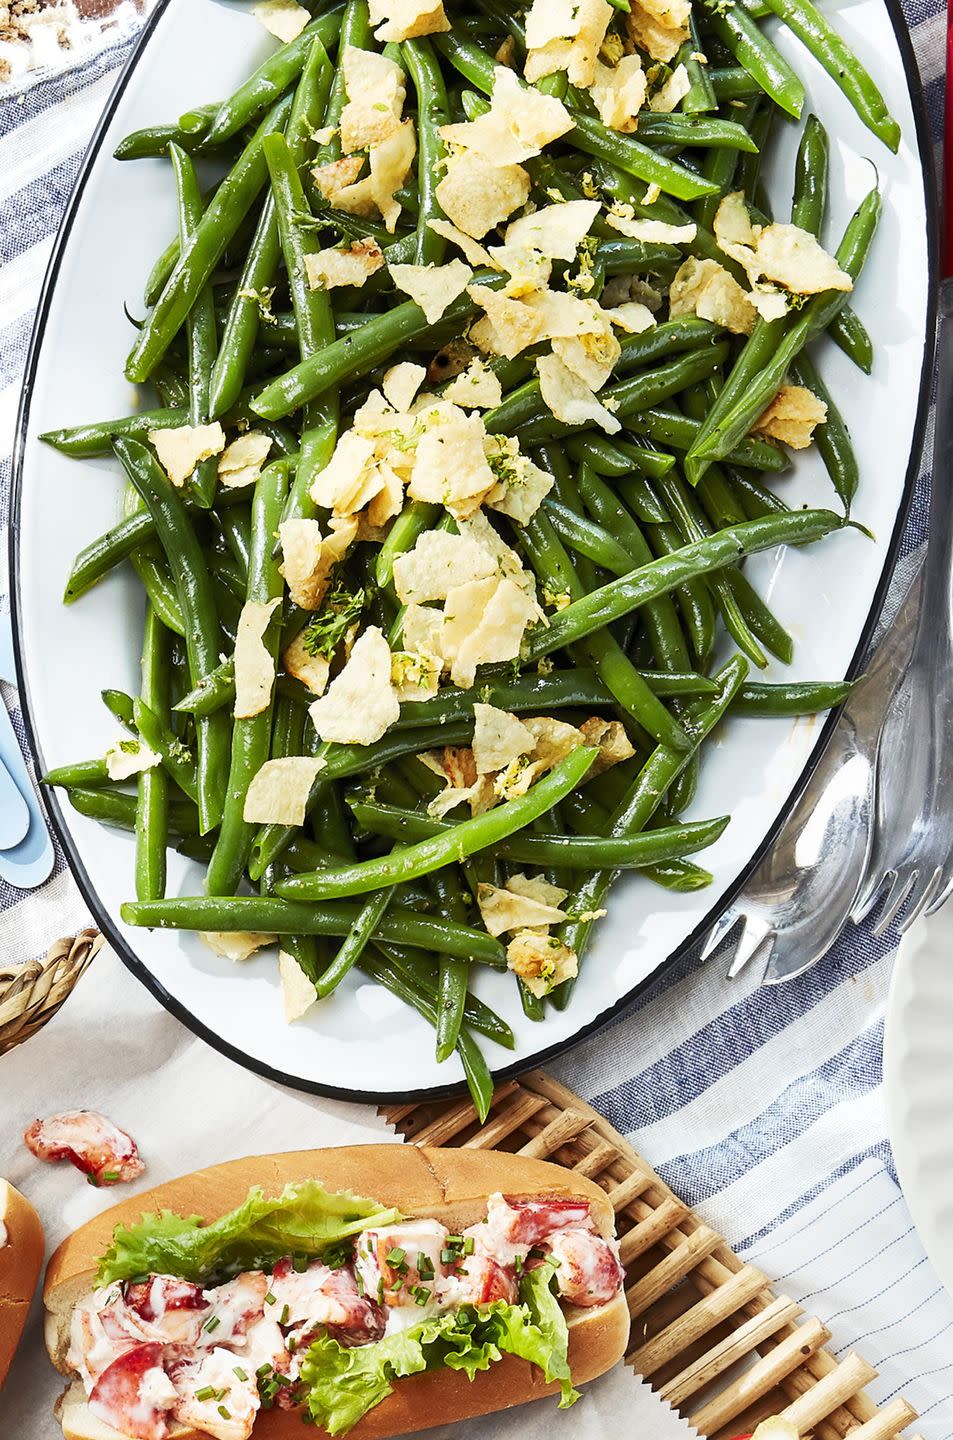 Green Beans and Crushed Salt-and-Vinegar Chips